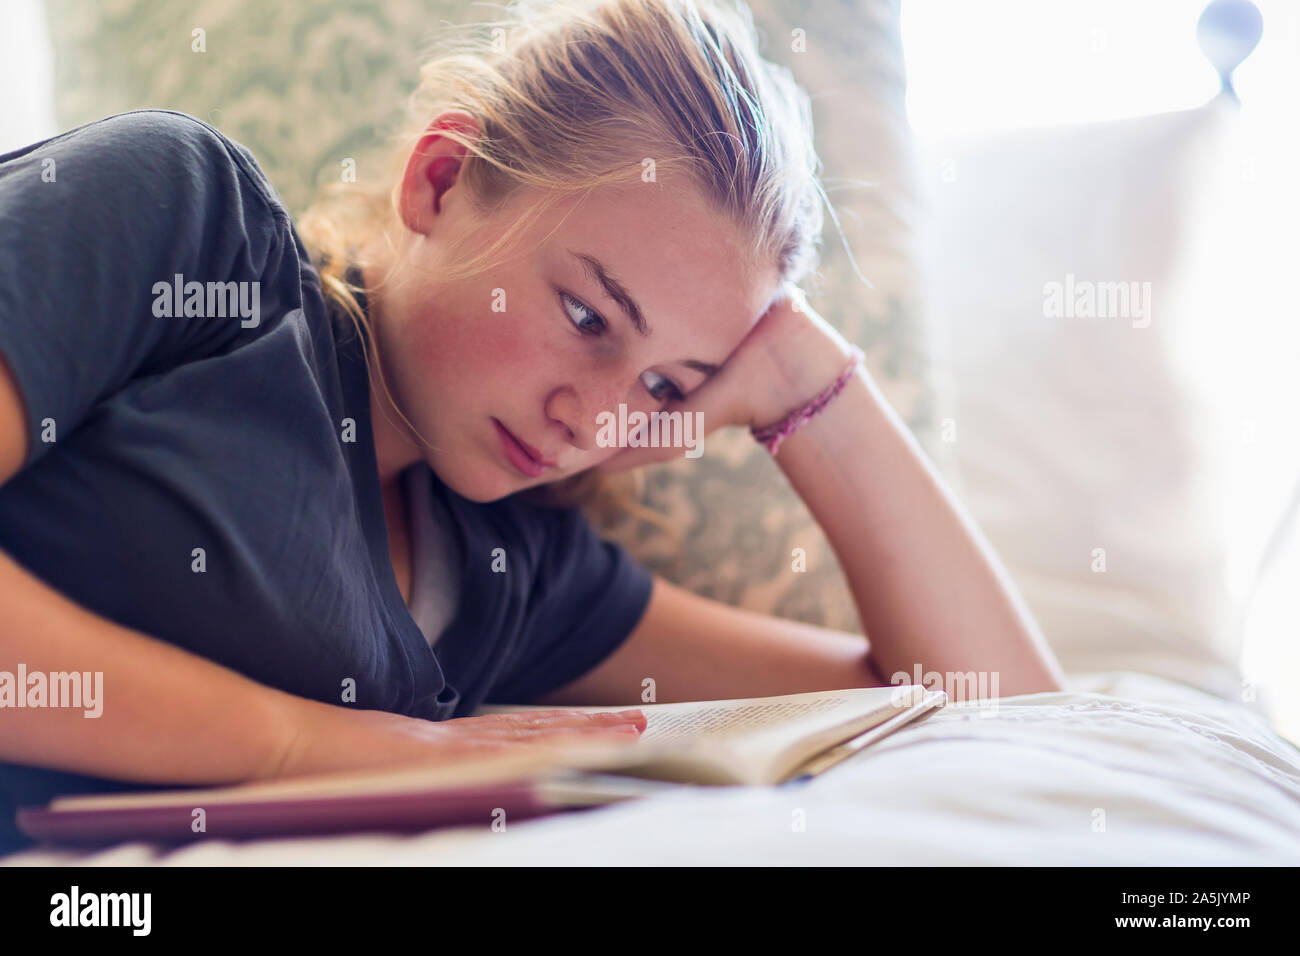 13 year old girl lying in her bed reading by window light Stock Photo